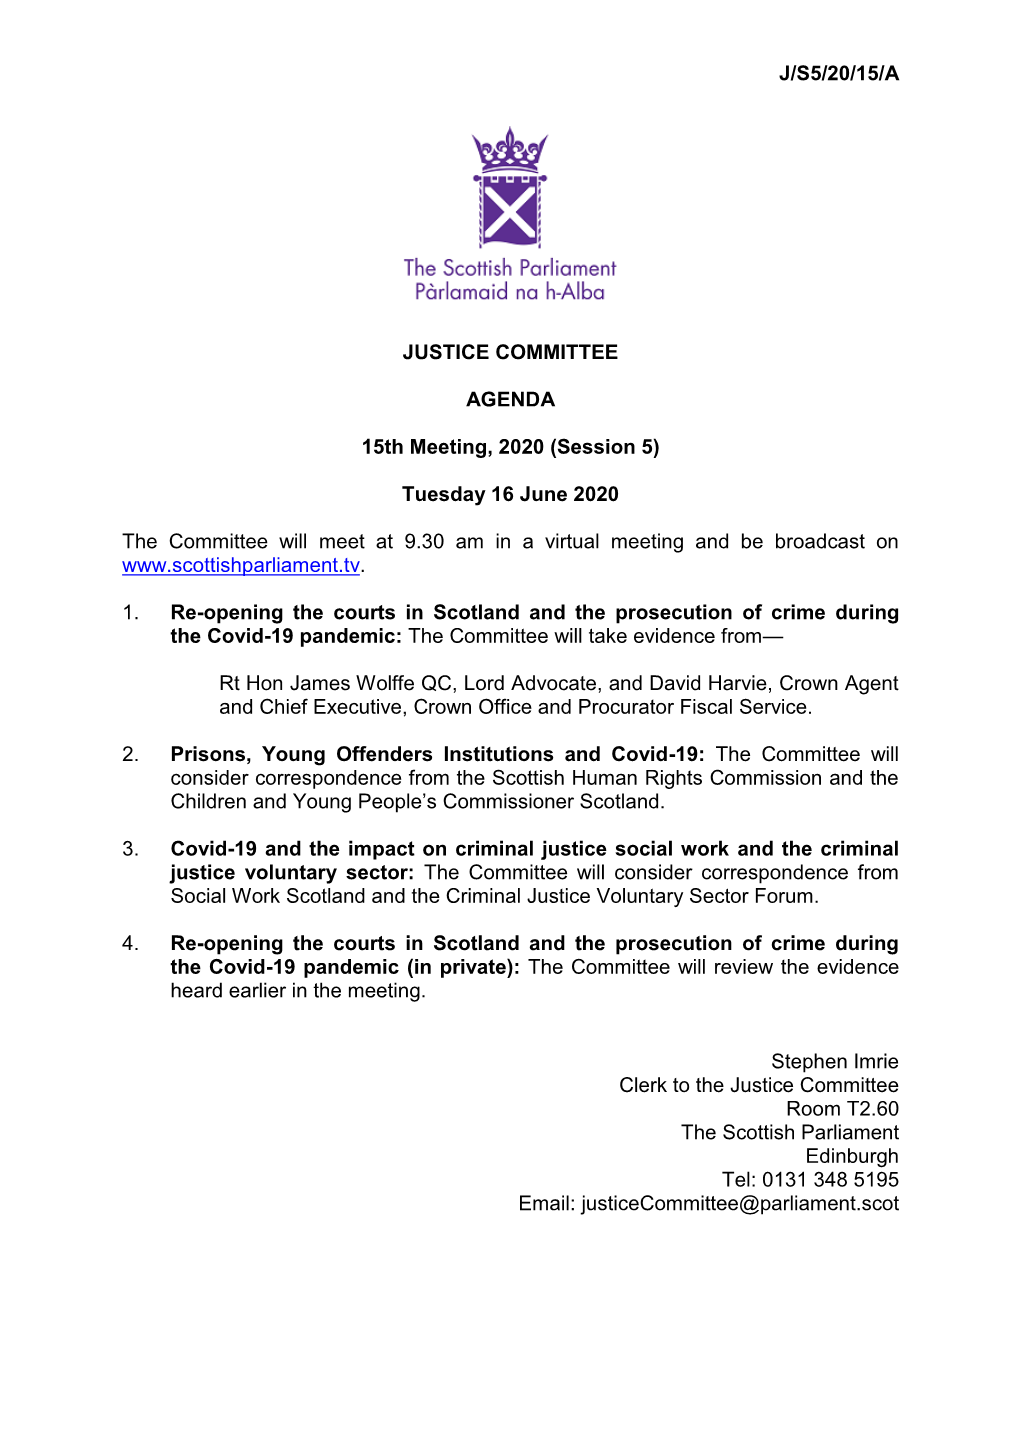 Tuesday 16 June 2020 the Committee Will Meet at 9.30 Am In